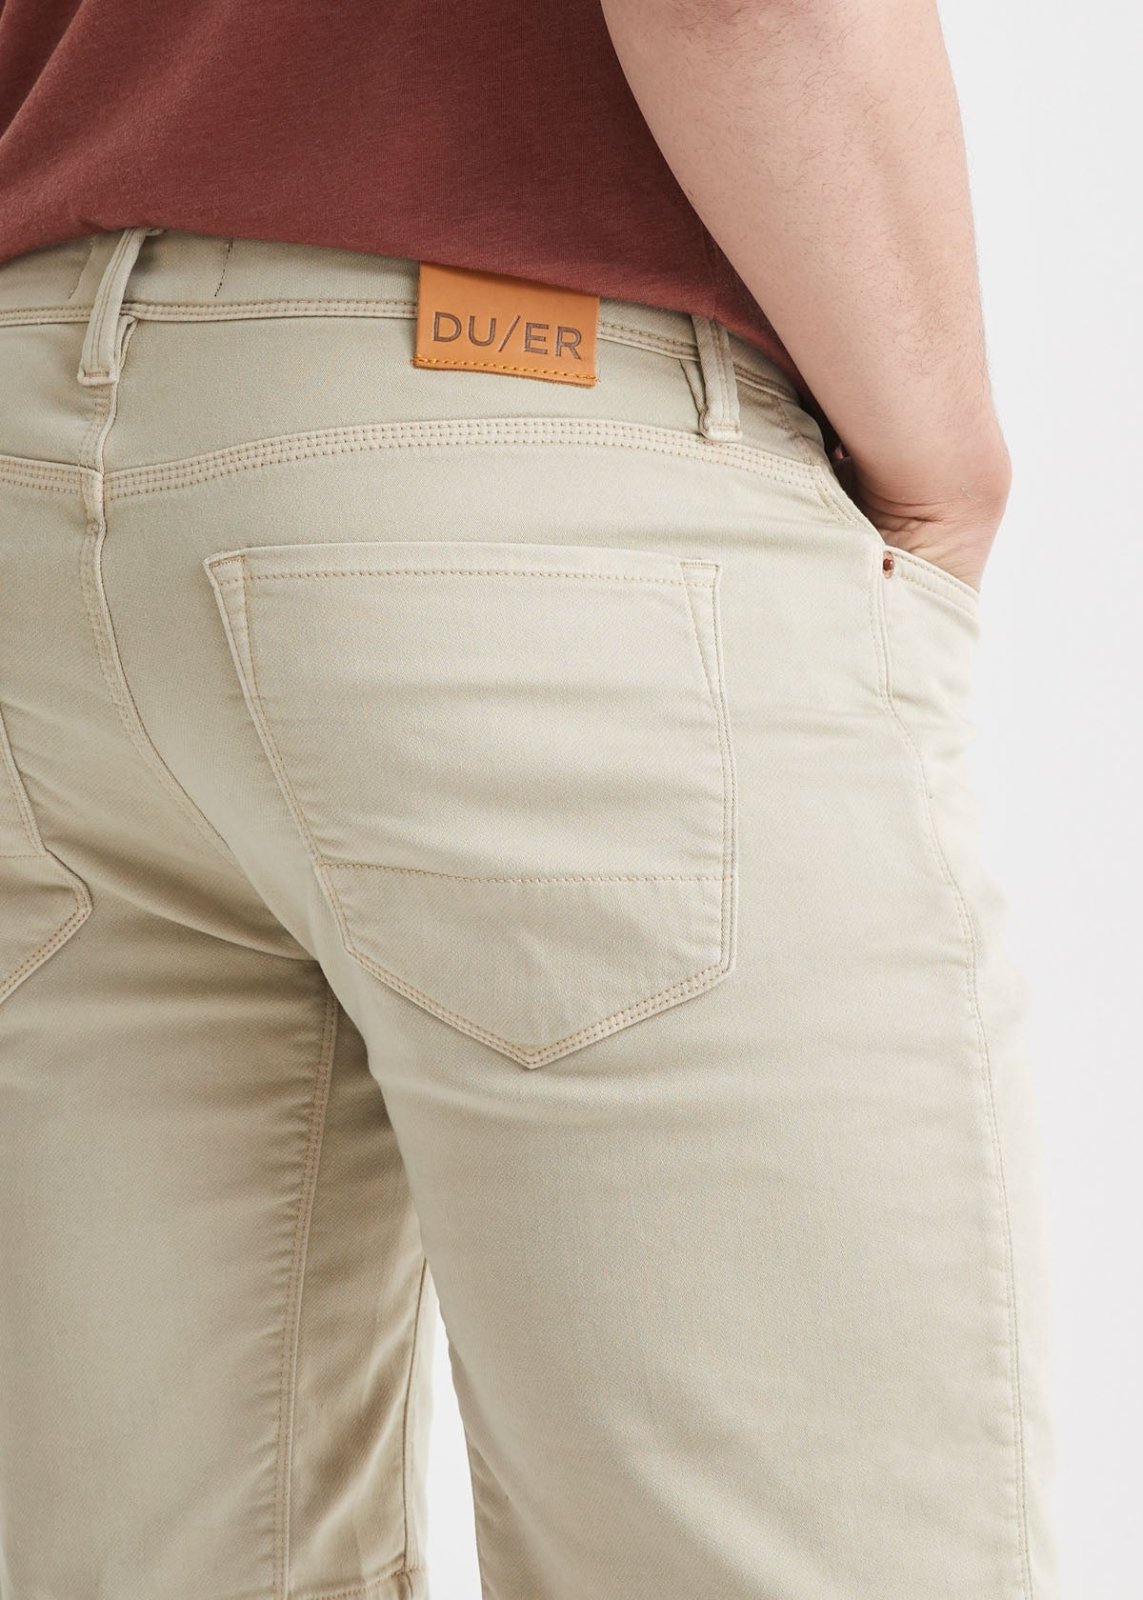 mens off-white relaxed fit performance stretch short back waistband detail